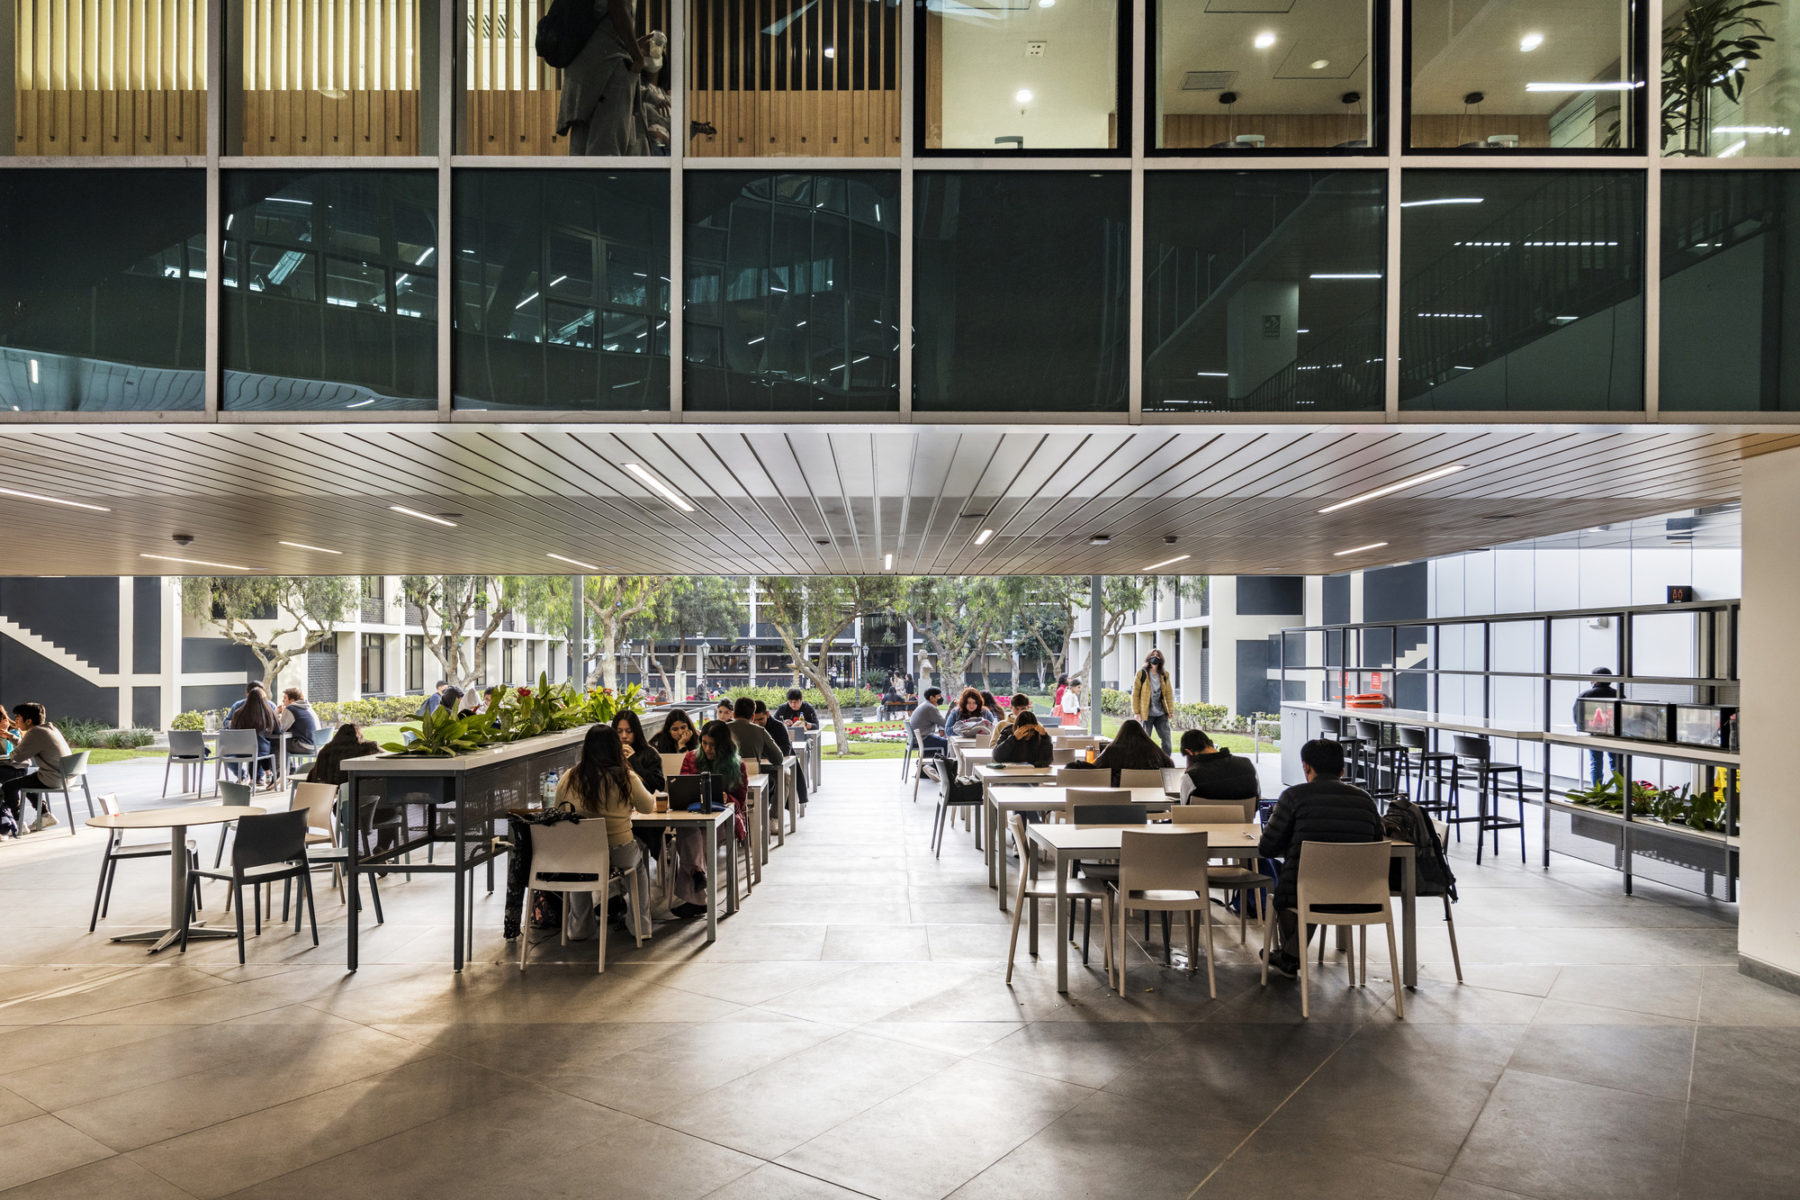 interior photo of study terrace with students studying at tables and chairs tucked beneath program space above